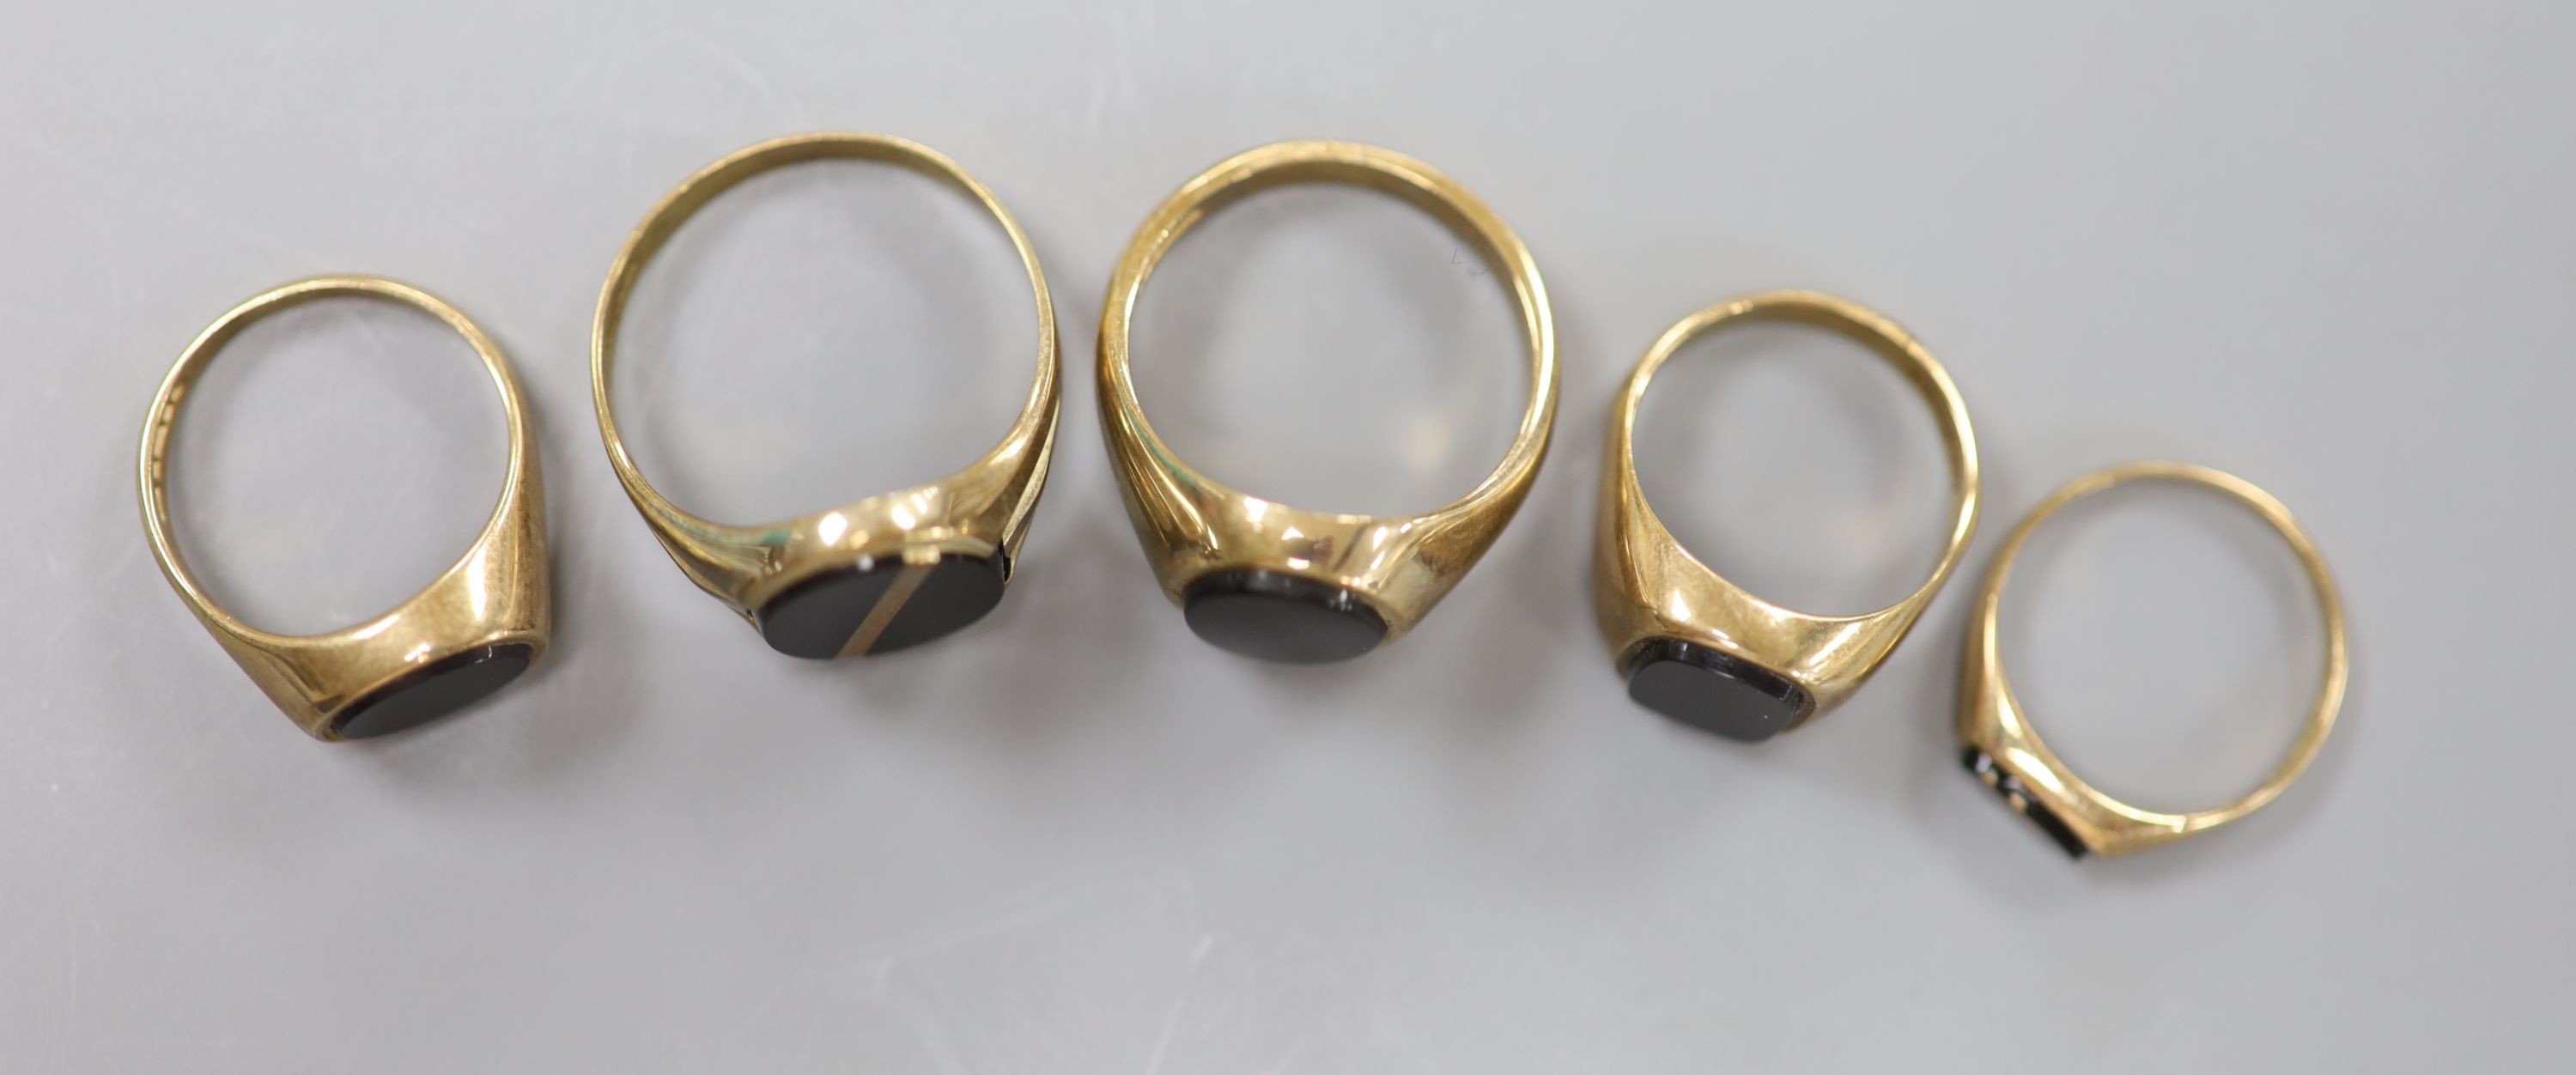 Four assorted modern 9ct gold and black onyx set signet rings and one other similar ring, largest size V/W